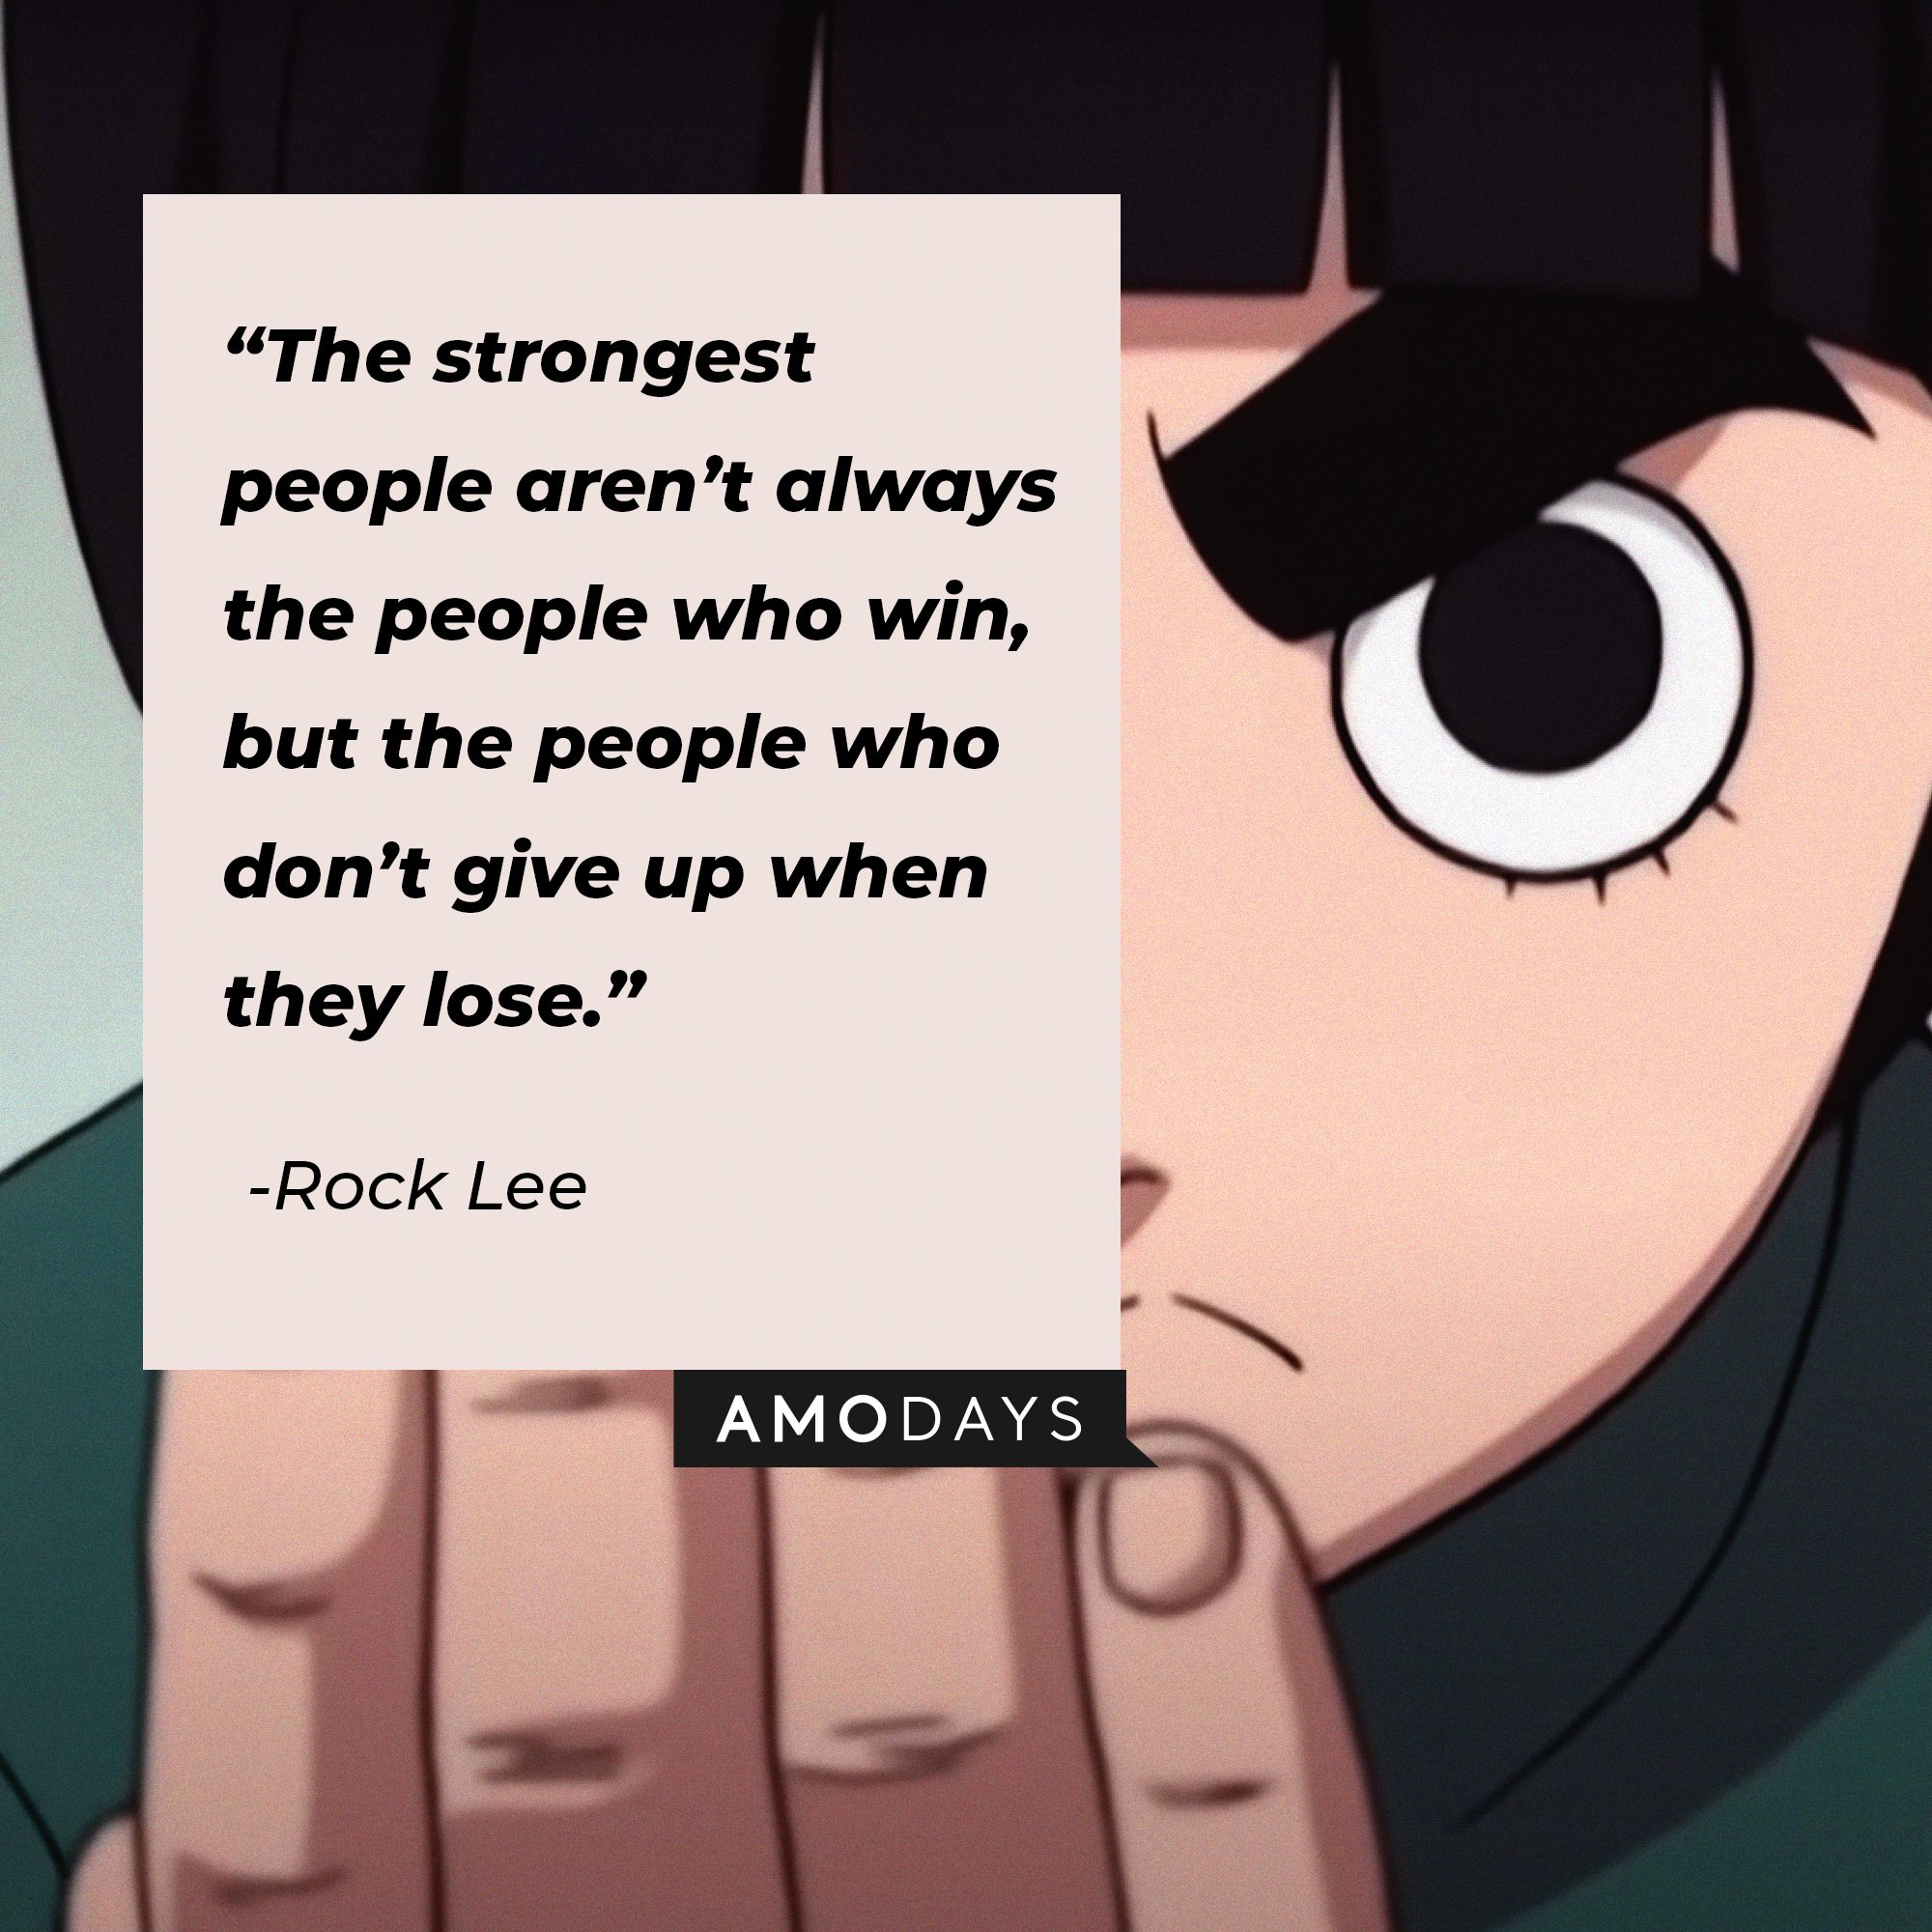 Rock Lee’s quote: "The strongest people aren't always the people who win, but the people who don't give up when they lose."  | Image: AmoDays